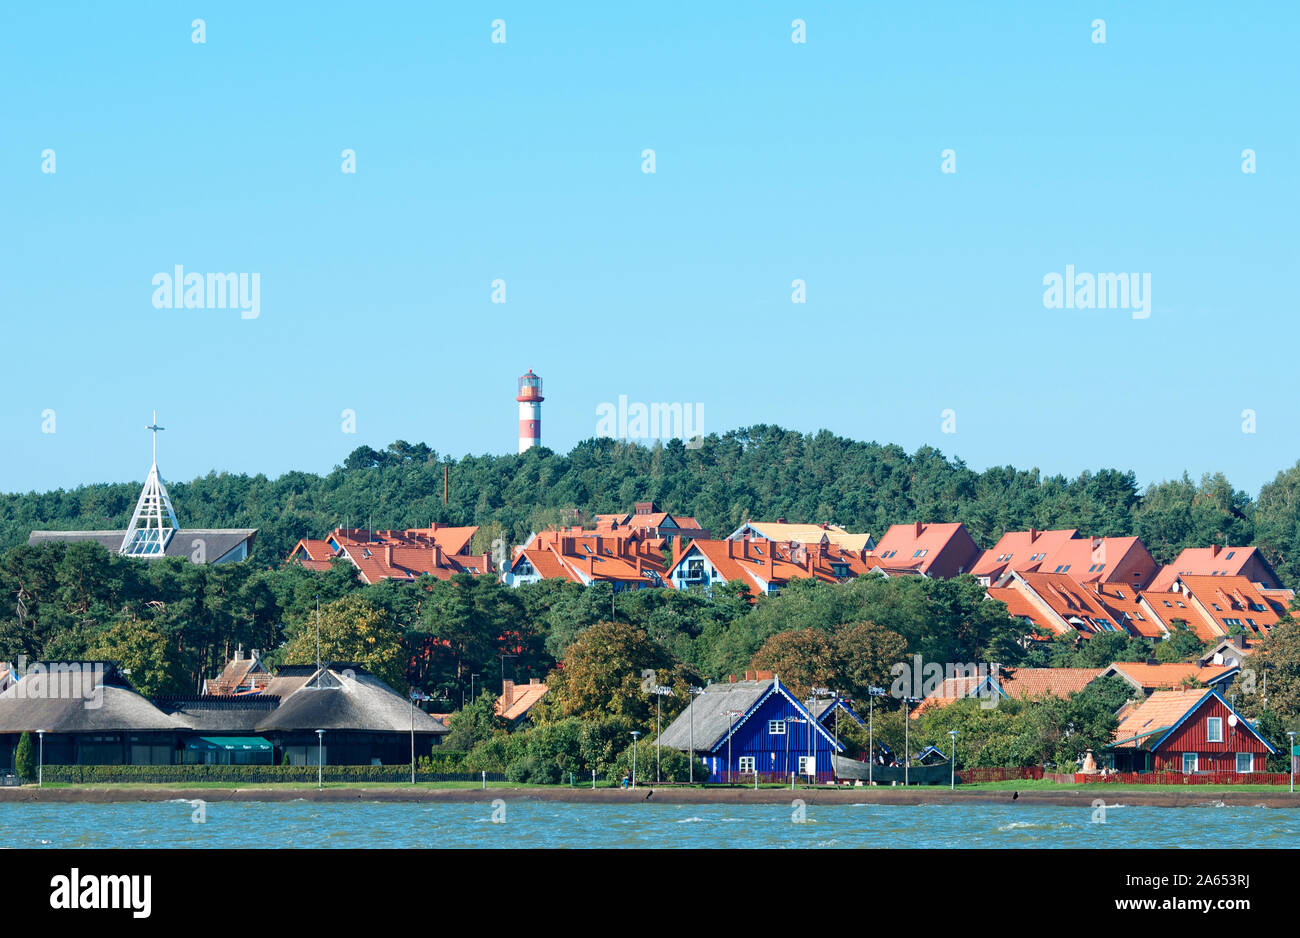 Panoramic view of Nida,a resort town in Lithuania with traditional fisherman's houses in the background.Nida located on the Curonian Spit between the Stock Photo